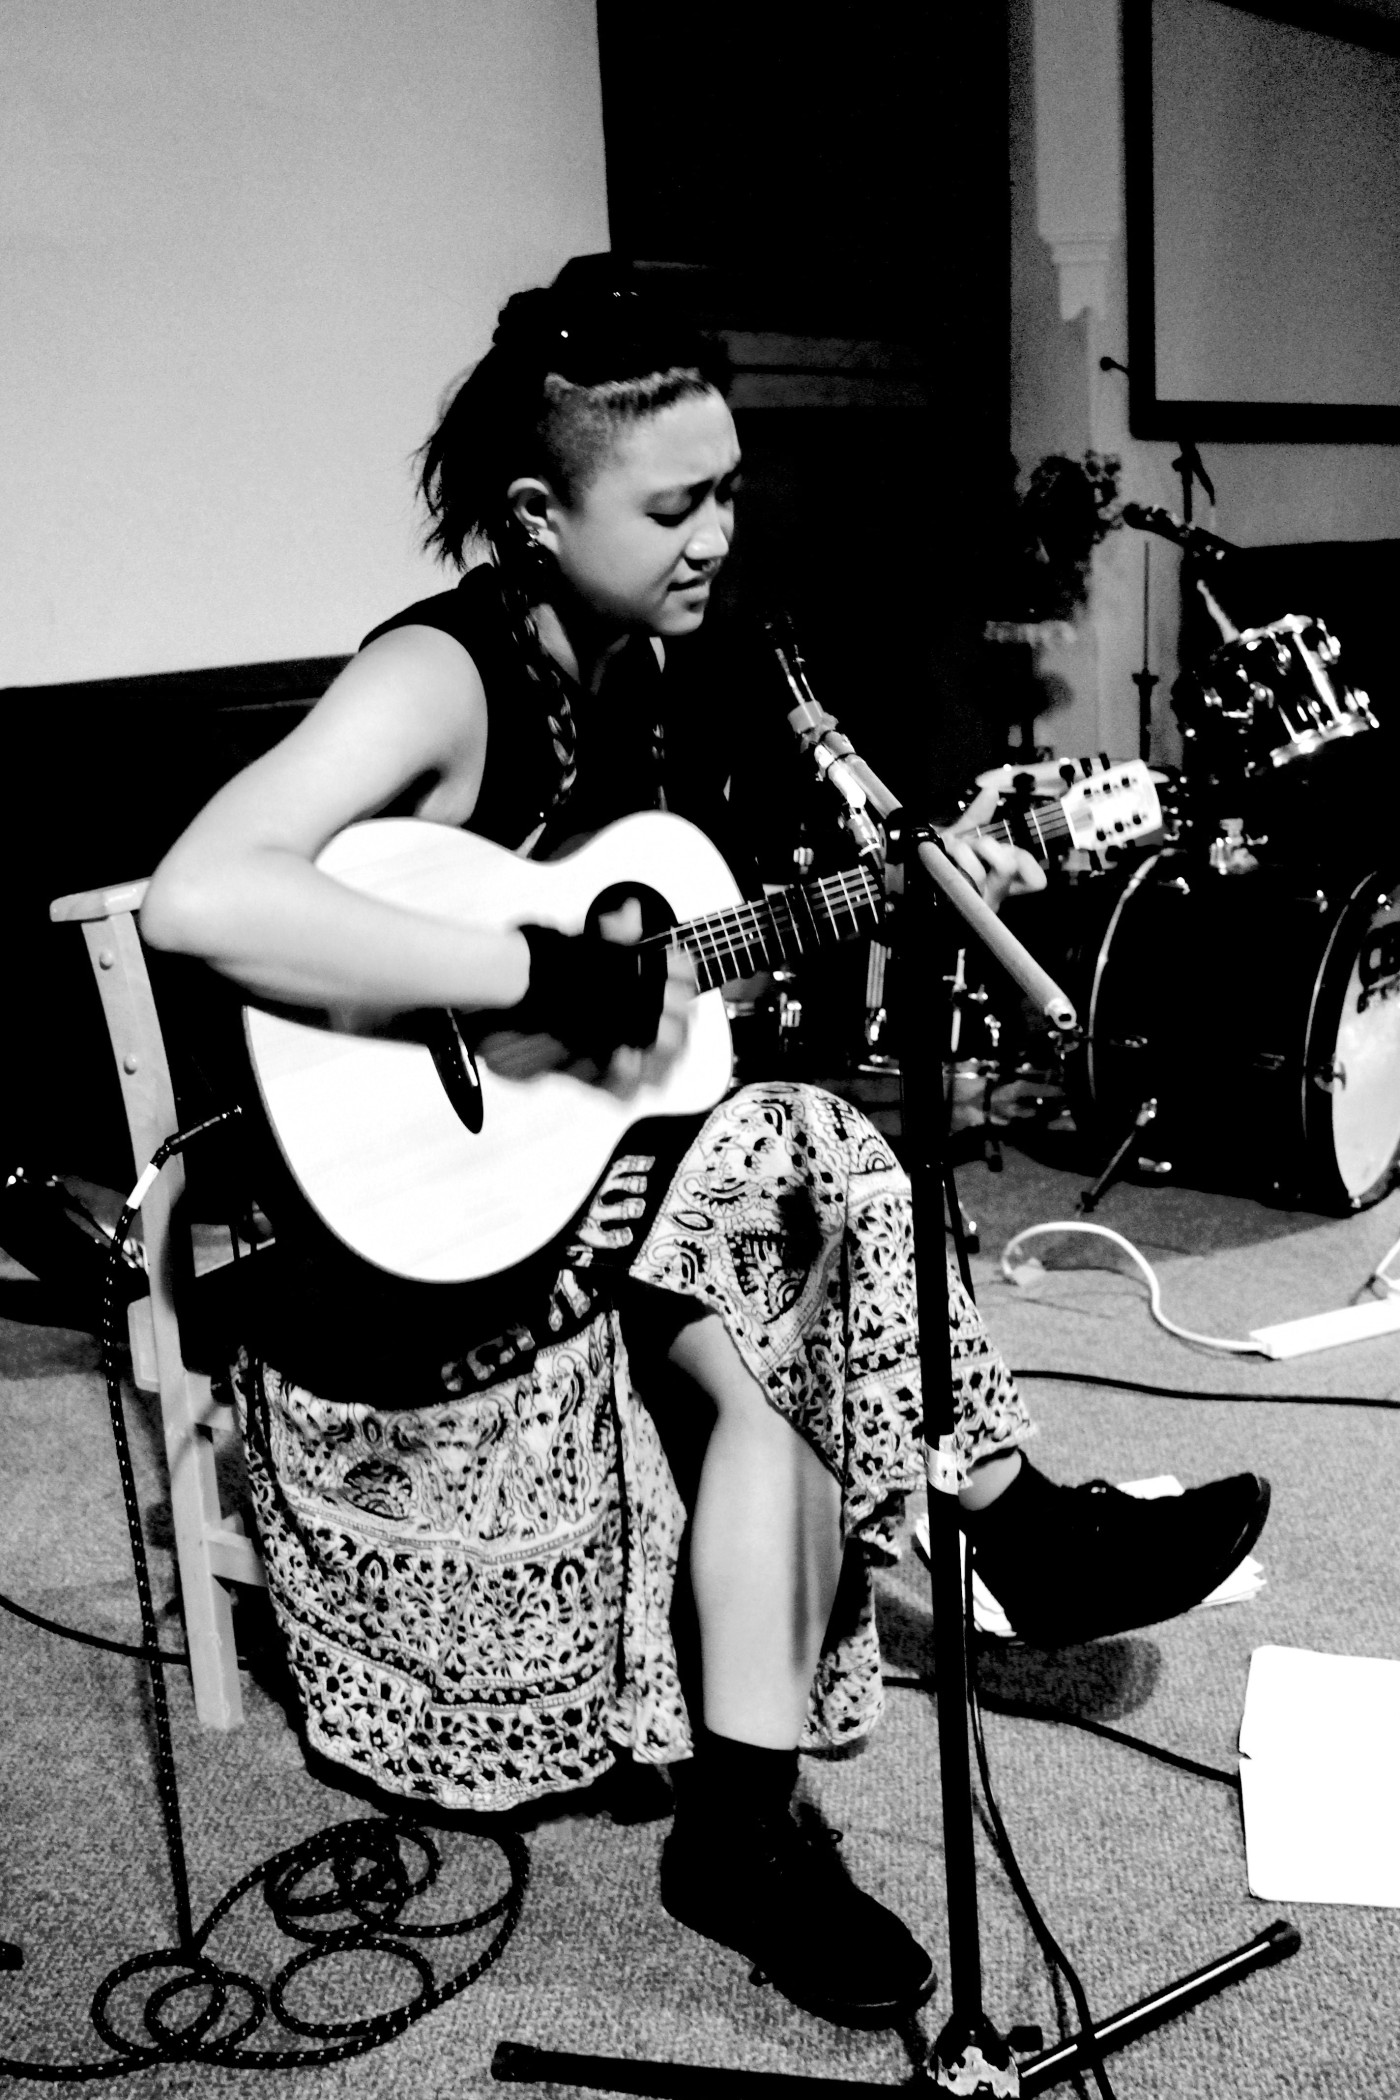 A greyscale image of Sarya Wu, a Taiwanese-American woman. She is seated with one leg crossed over the other, playing an acoustic guitar, and singing into a floor mic.